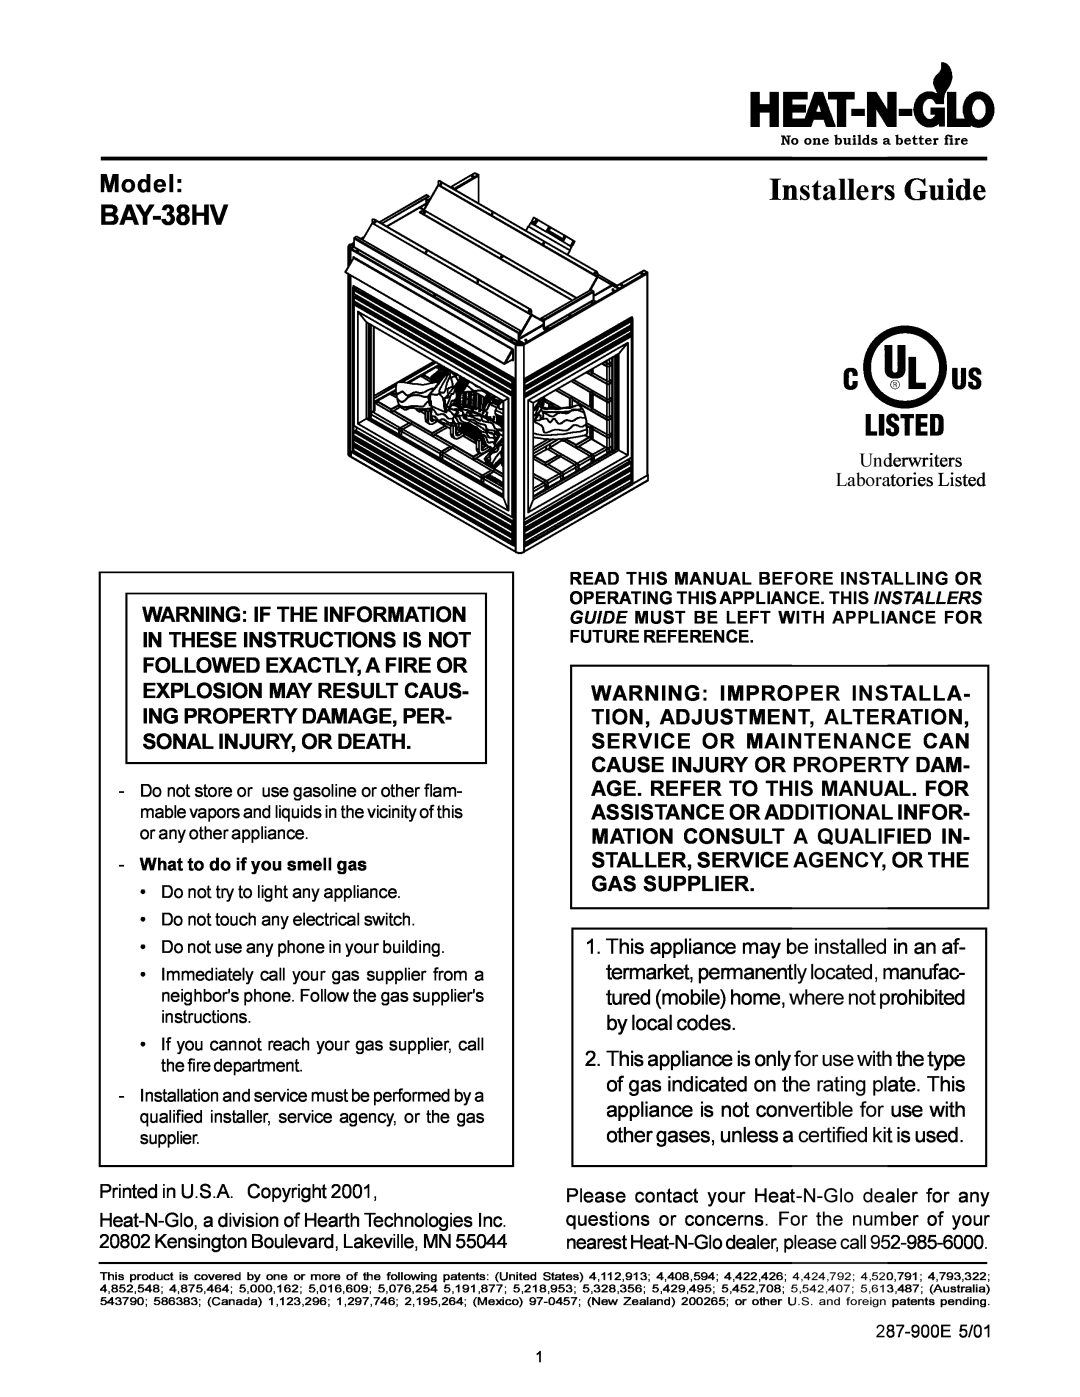 Heat & Glo LifeStyle BAY-38HV manual Model, Underwriters Laboratories Listed, Installers Guide 